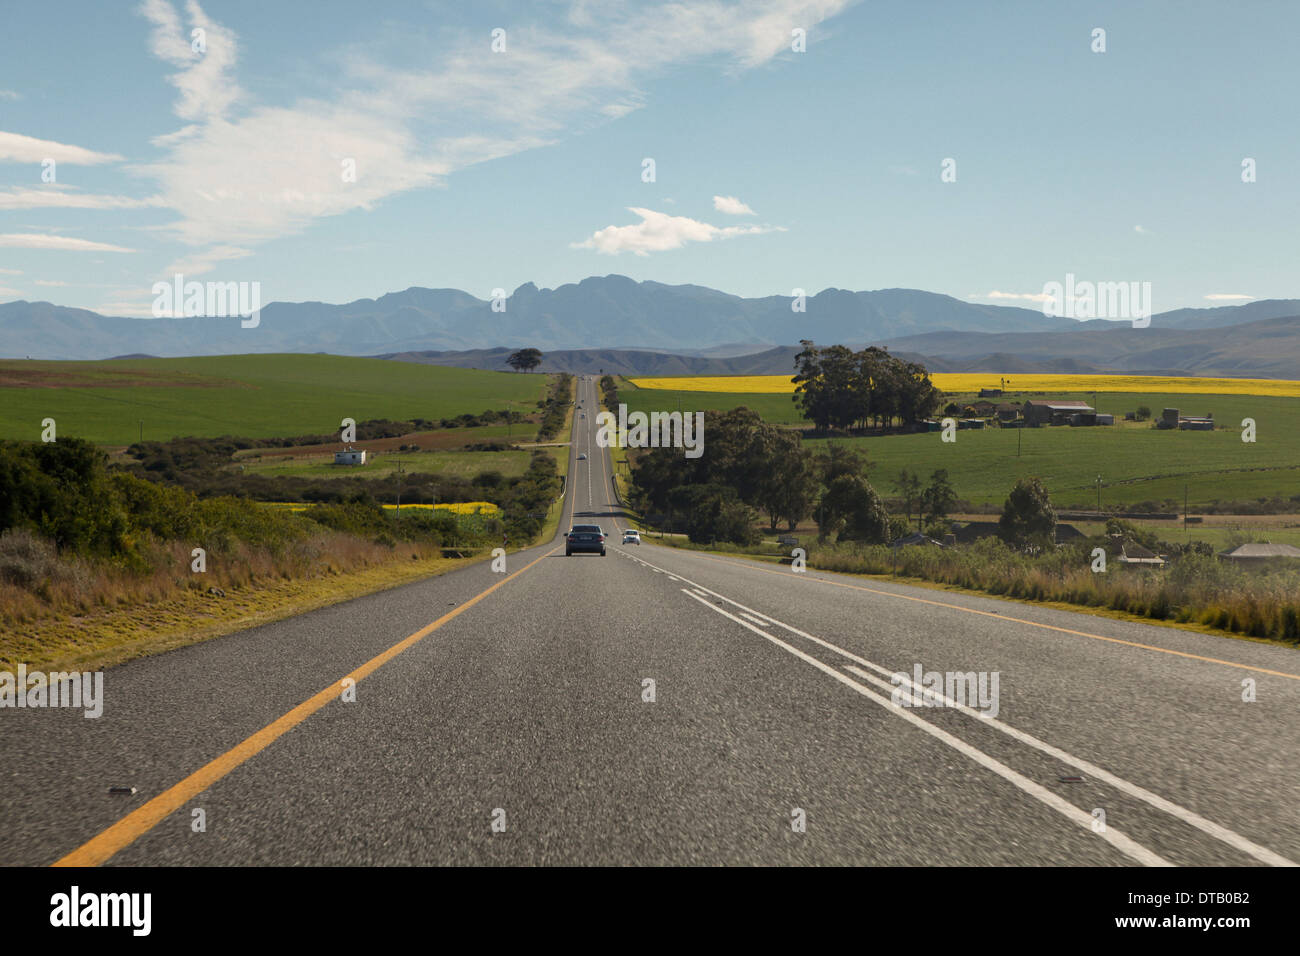 Cars on a road leading to the Riviersonderend Mountains, South Africa Stock Photo